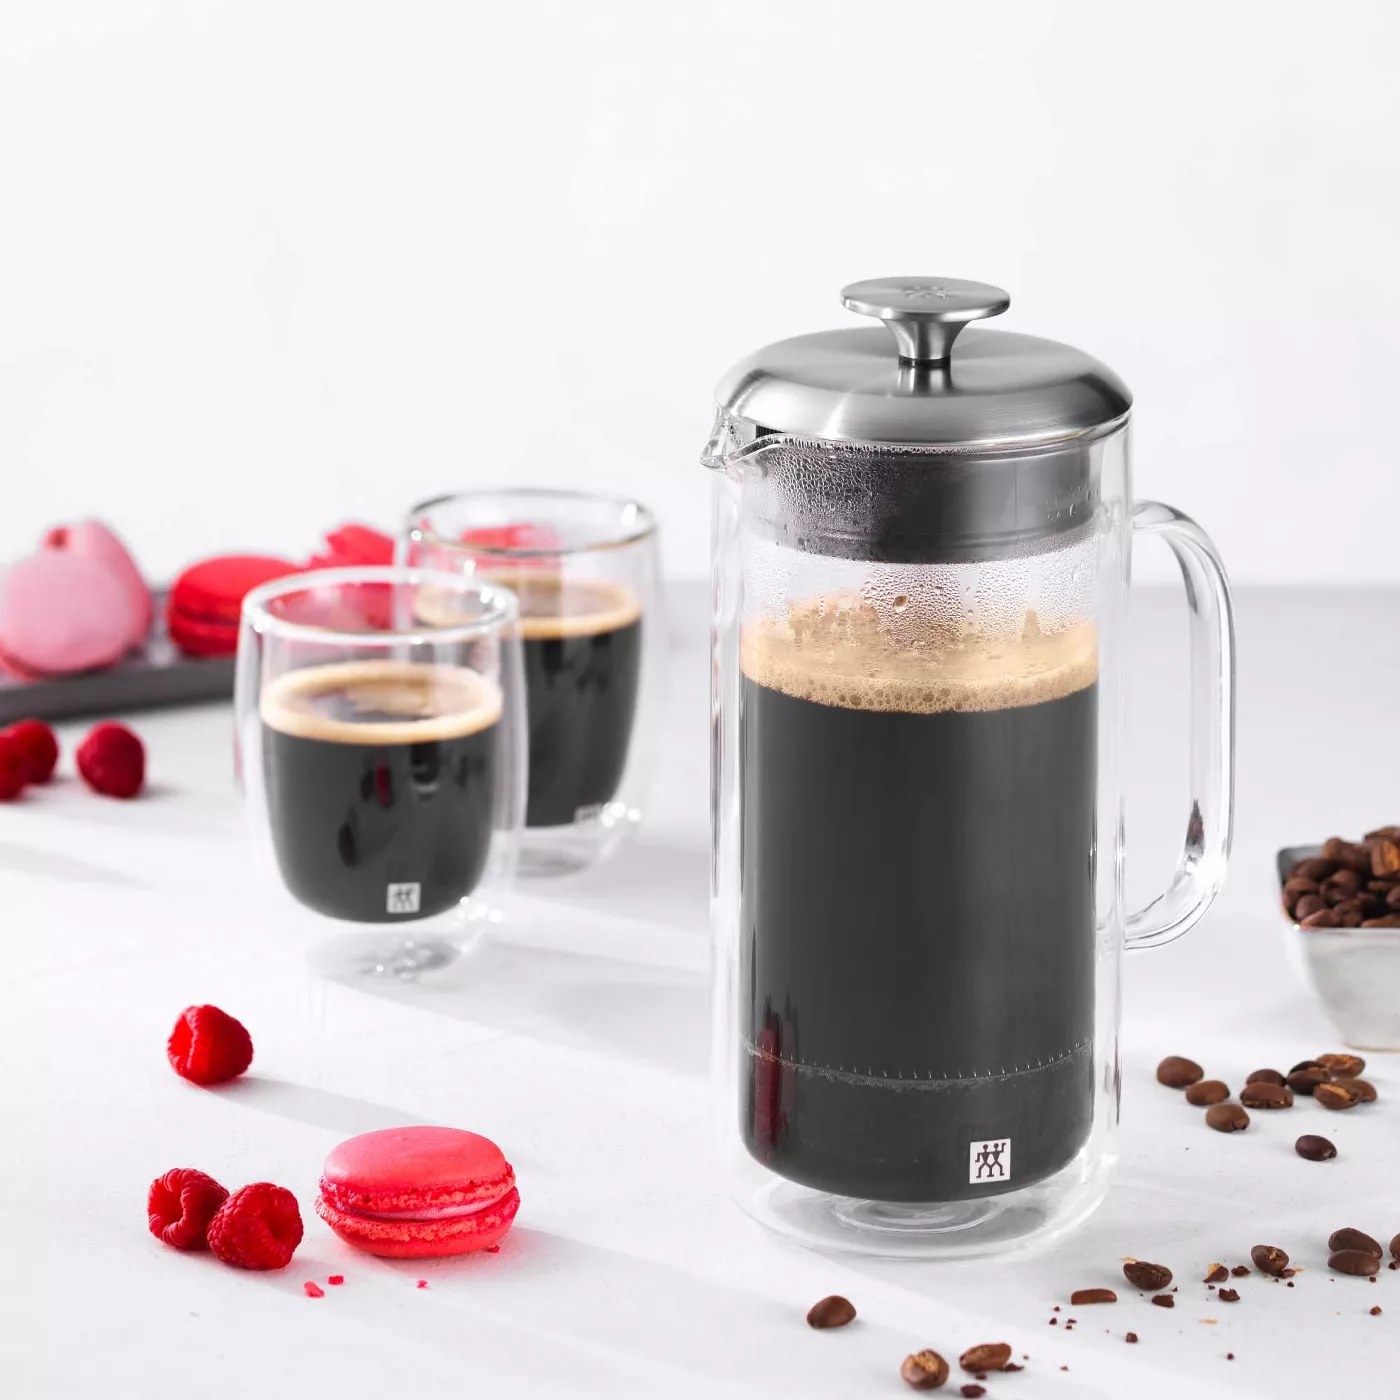 The double-walled French press